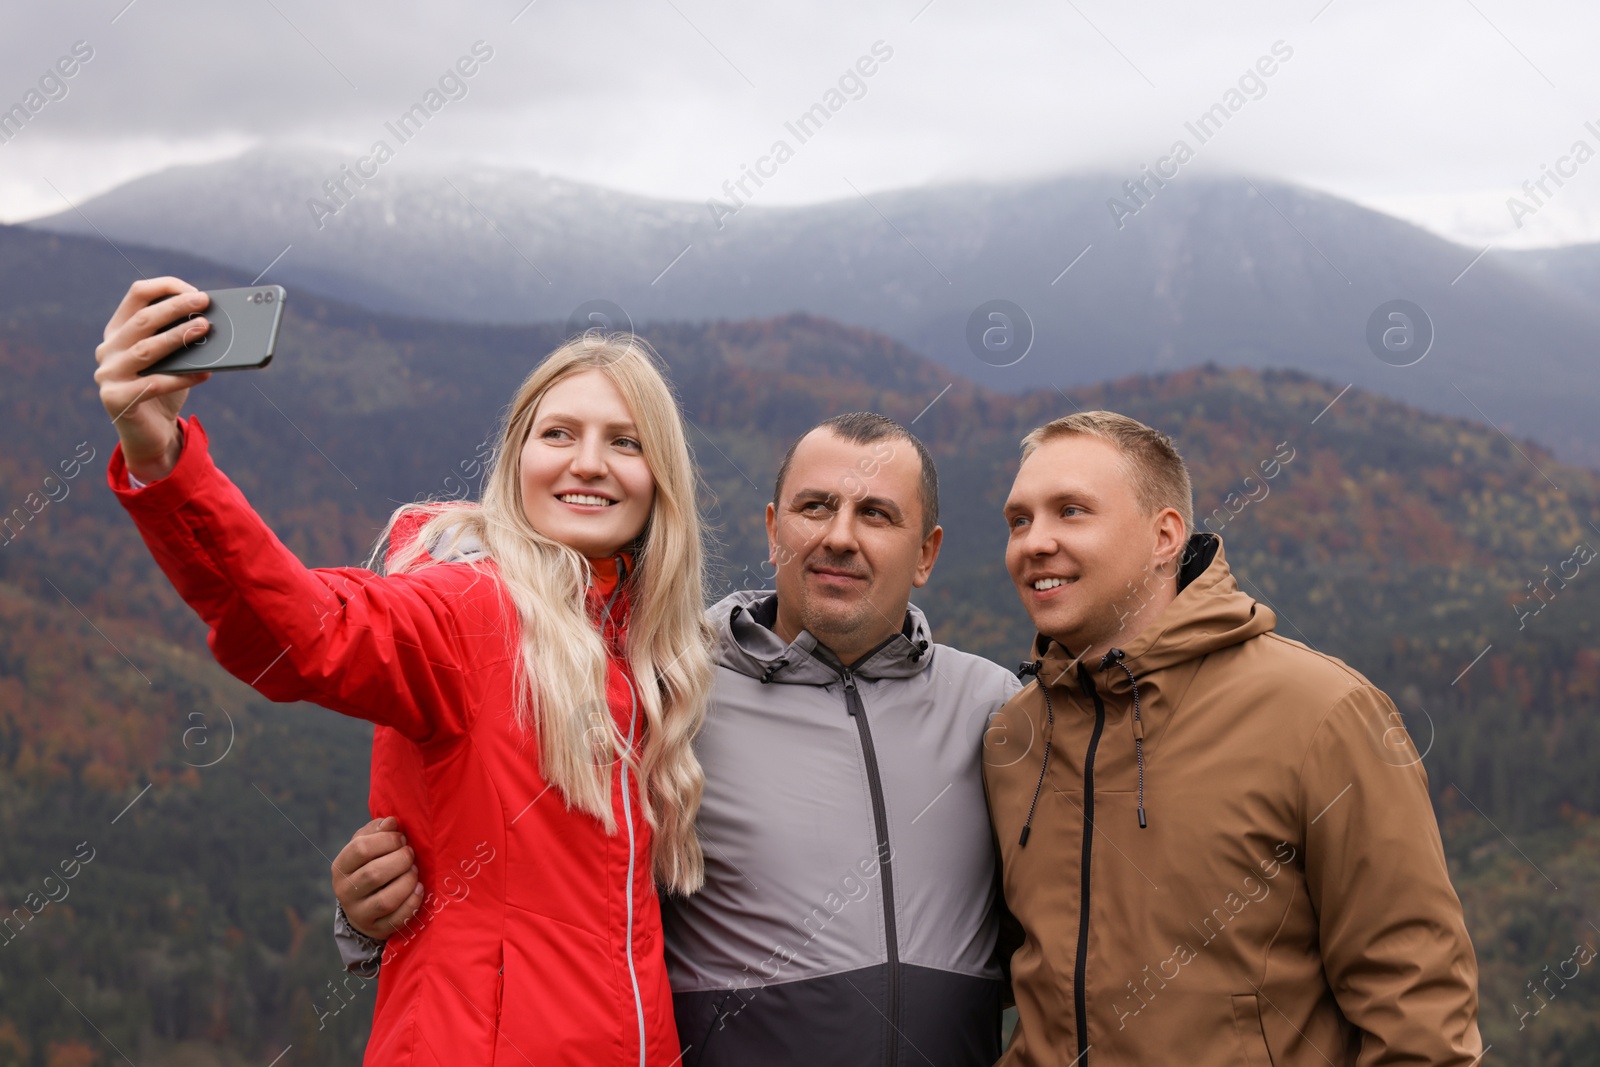 Photo of Friends taking selfie together in mountains on autumn day